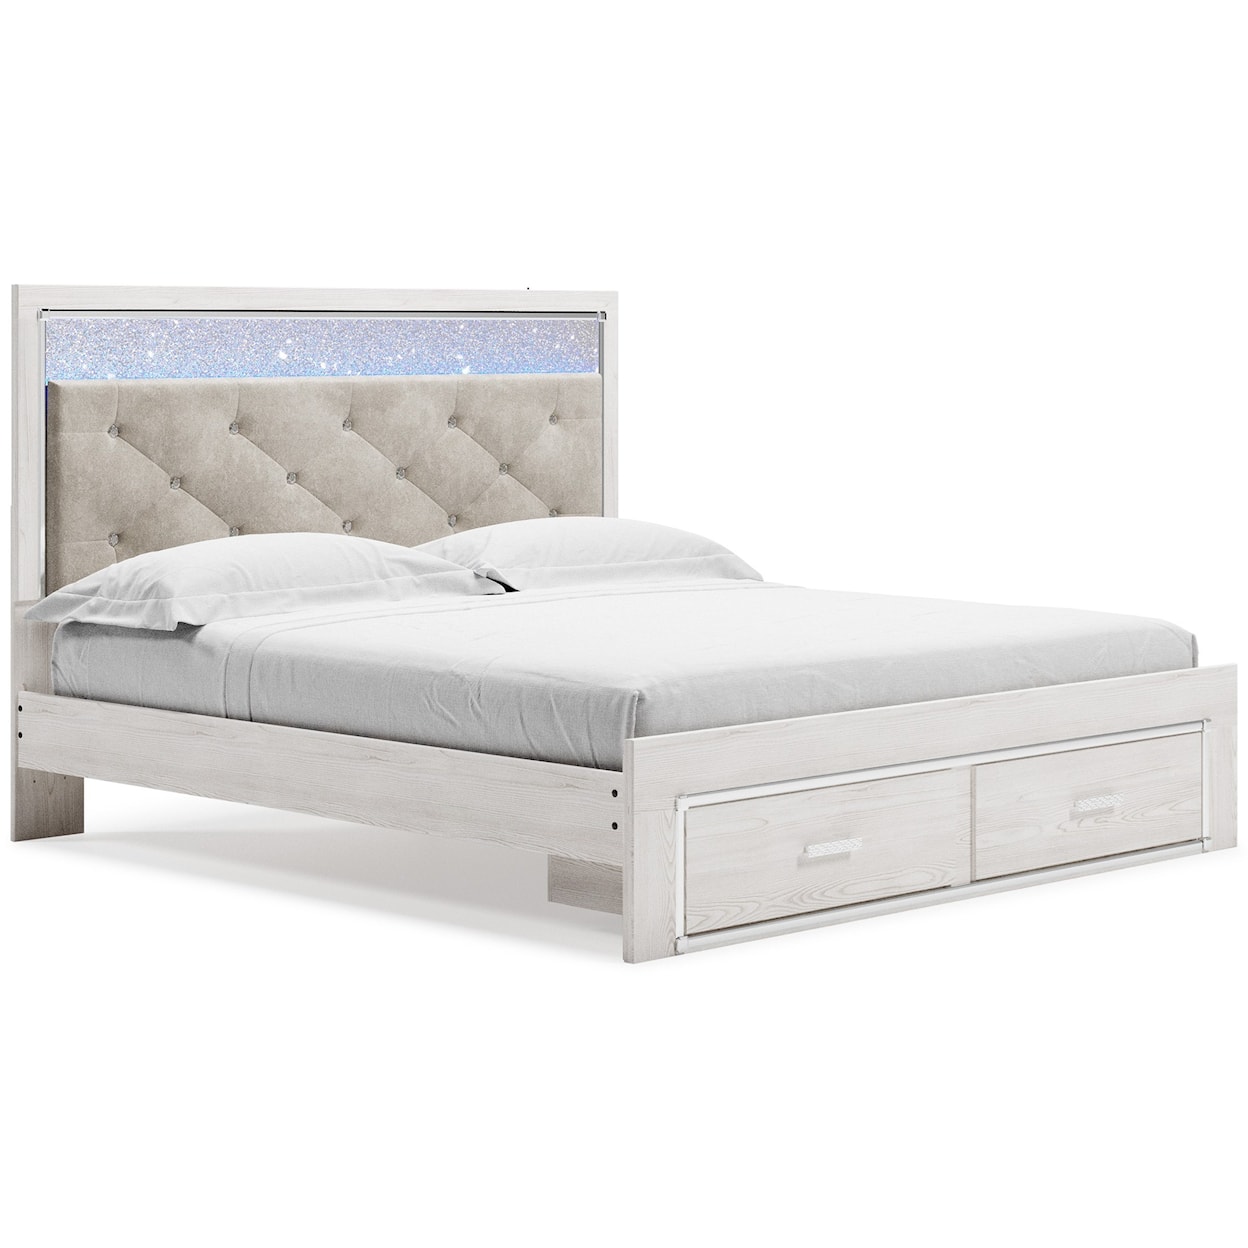 Signature Design by Ashley Altyra King Storage Bed 